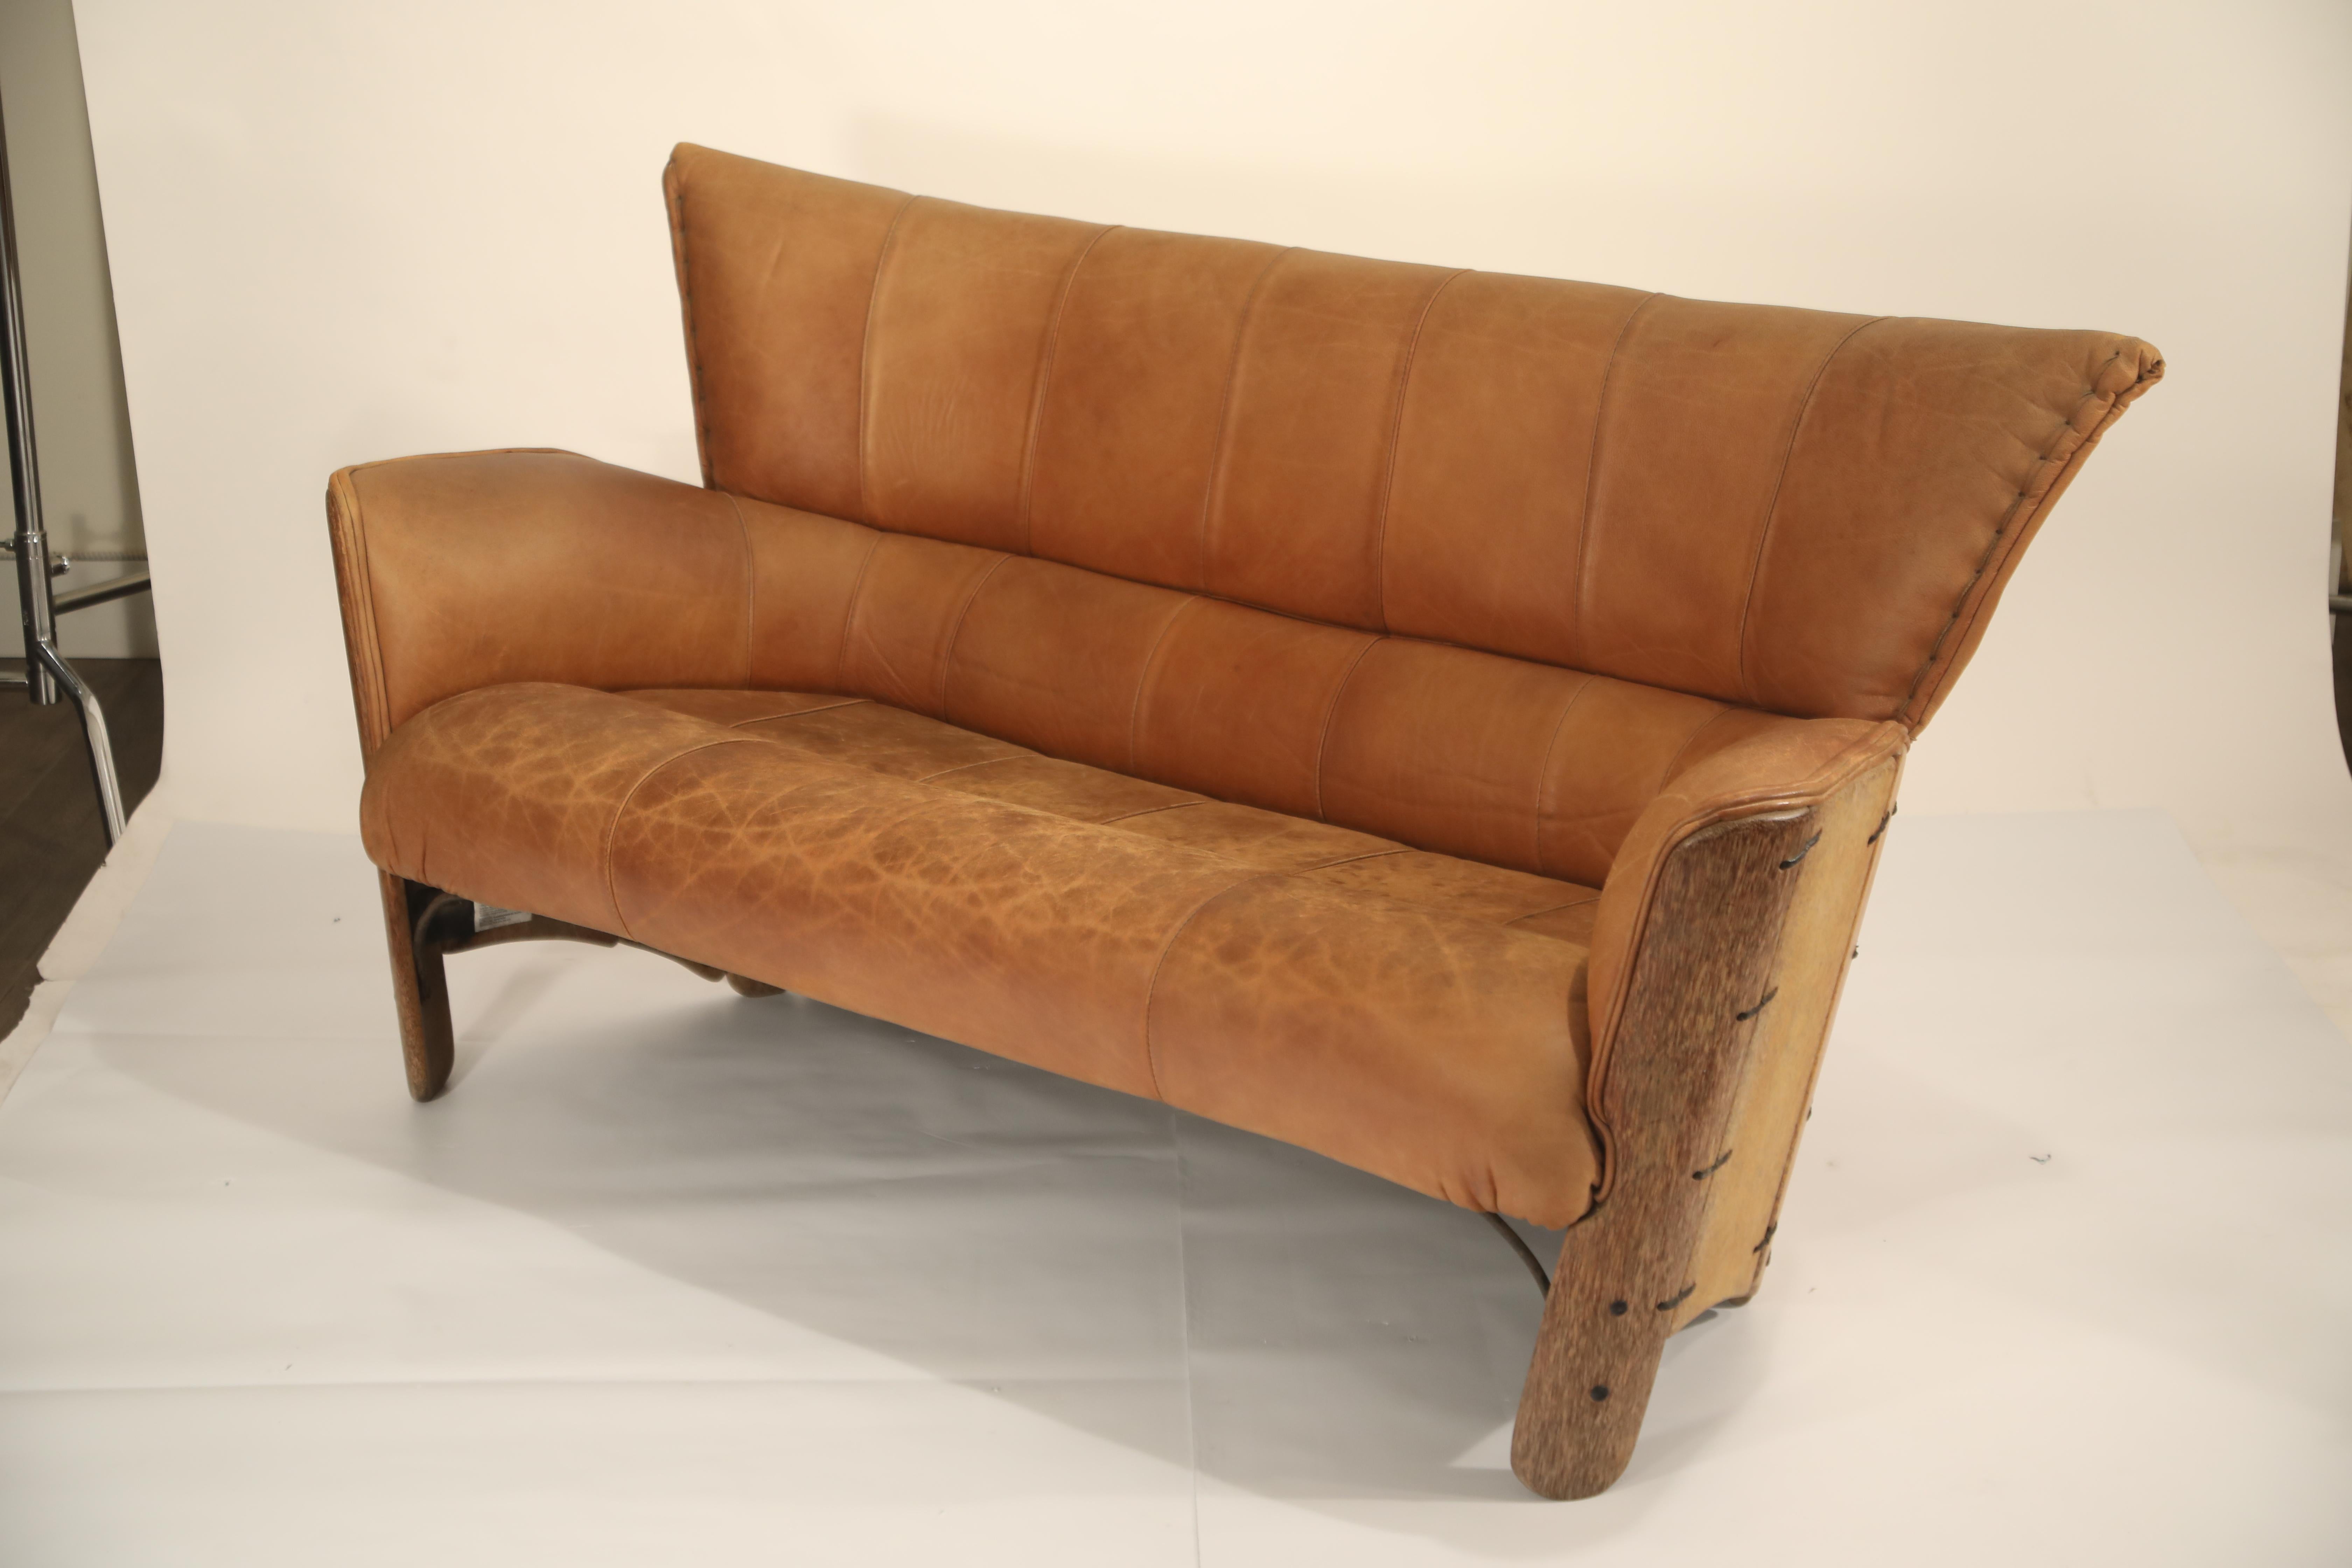 This incredible lightly distressed leather and palmwood sofa by Pacific Green is the perfect designer piece that can both stand out in a space and feel right at home. It's unique wingback styling gives it a dramatic look, while the light patina on